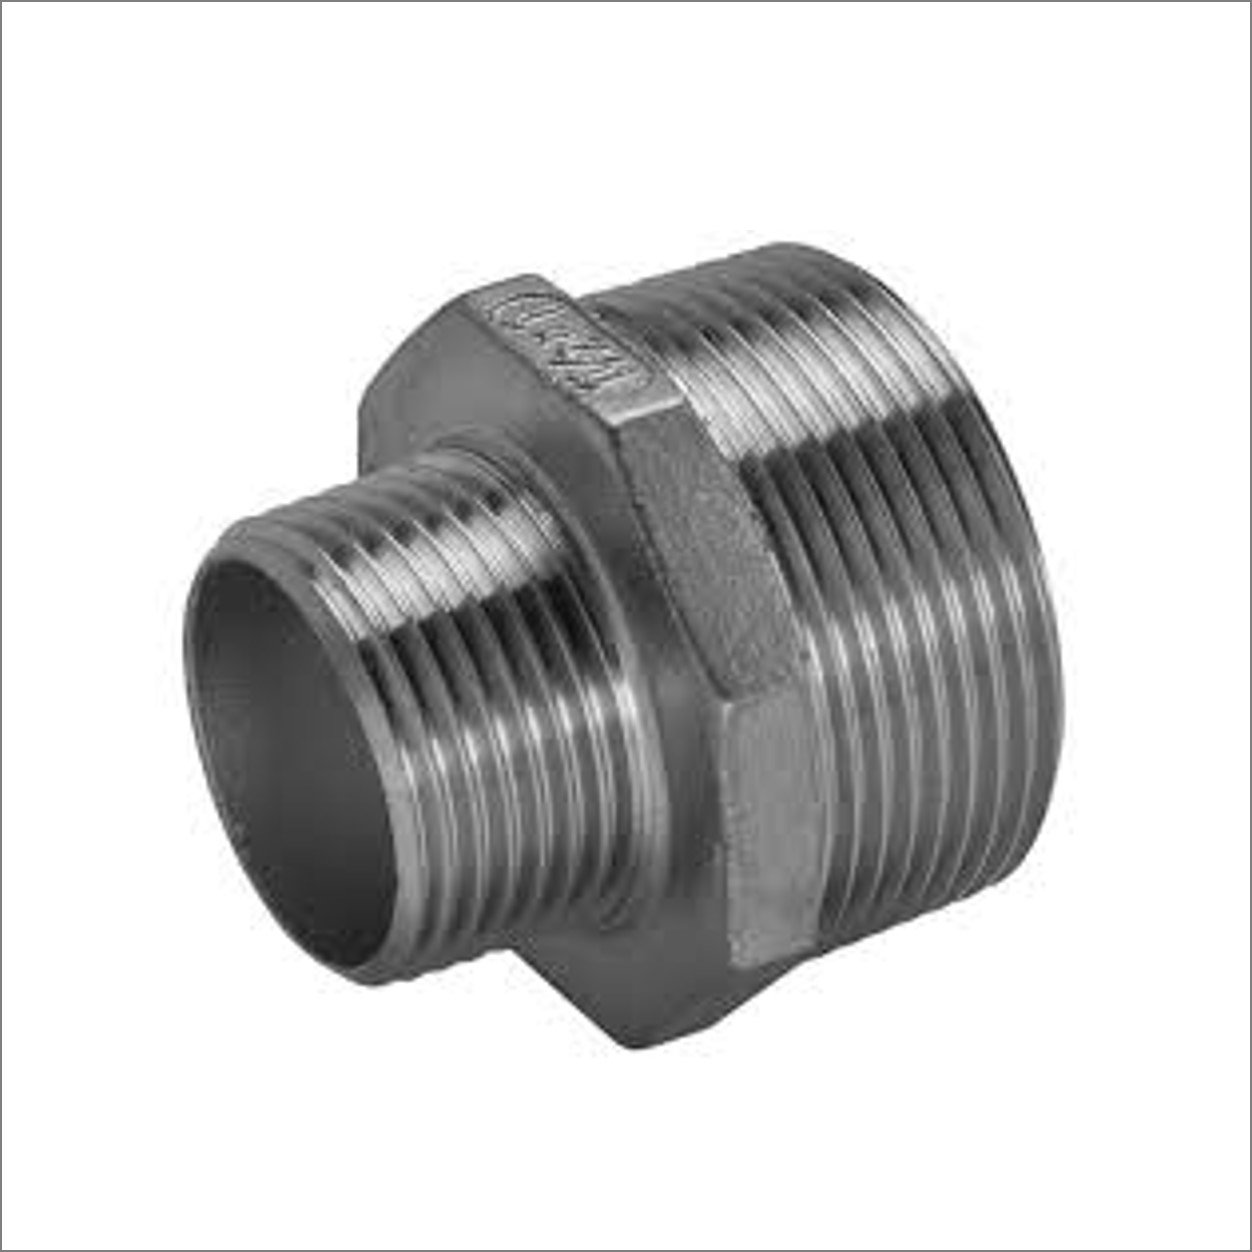 1-1/4" BSPT Close Taper Nipple X 38MM 316 Stainless Steel 150LB Pipe Fitting 